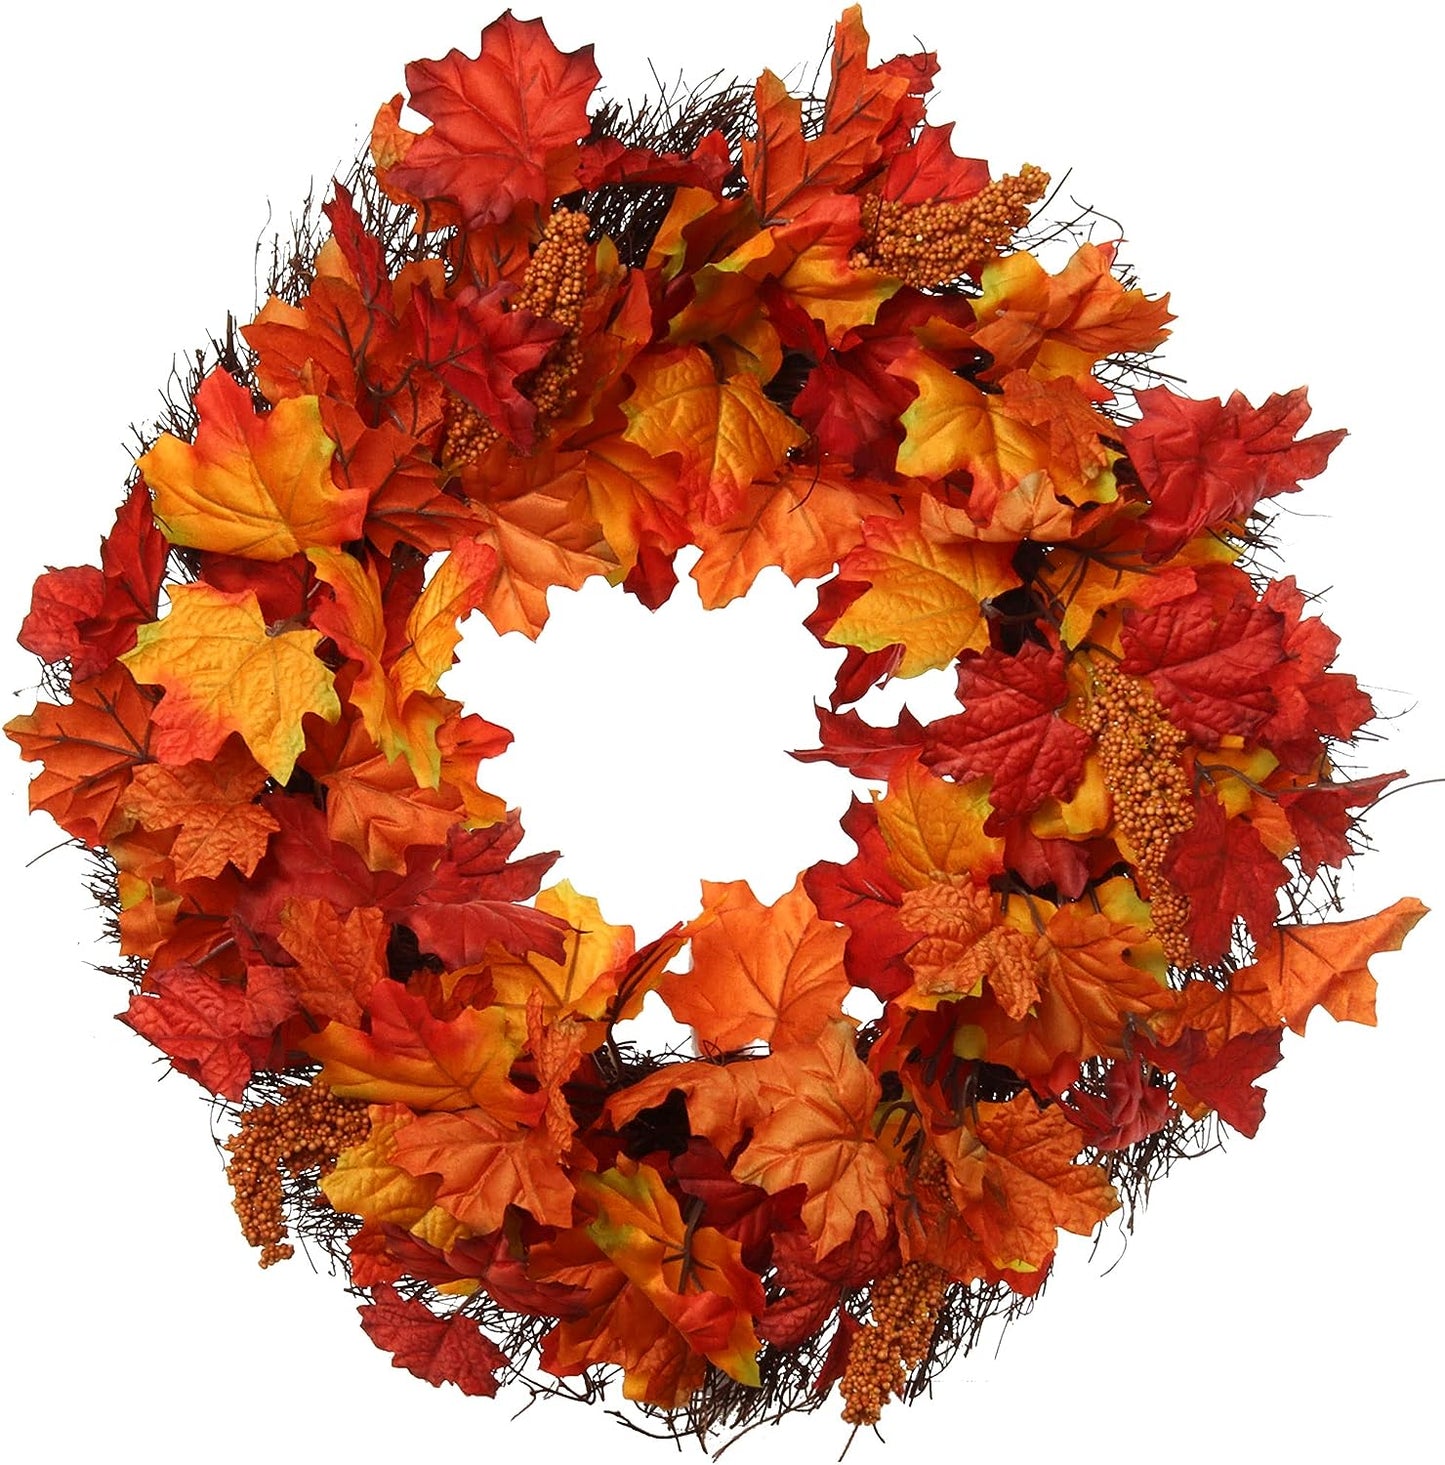 Autumn Maple Leaf Wreath | 20" Wide Silk Fall Wreaths | Grapevine Ring | Outdoor Front Door Thanksgiving Decor | Home & Office Decoration